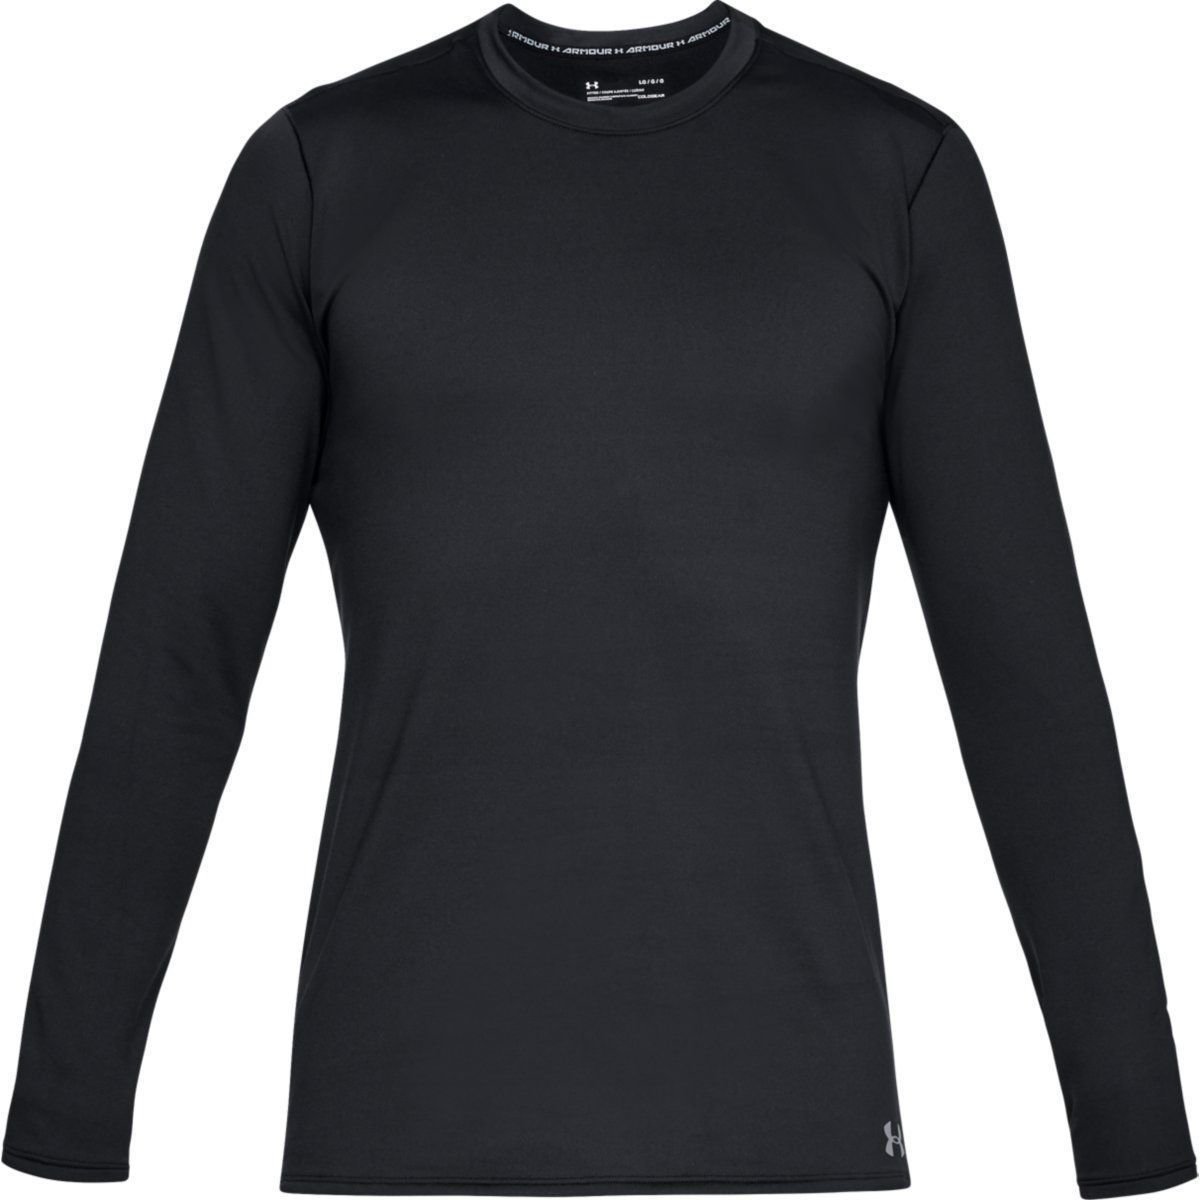 Thermal Clothing Under Armour Fitted CG Crew Black XL